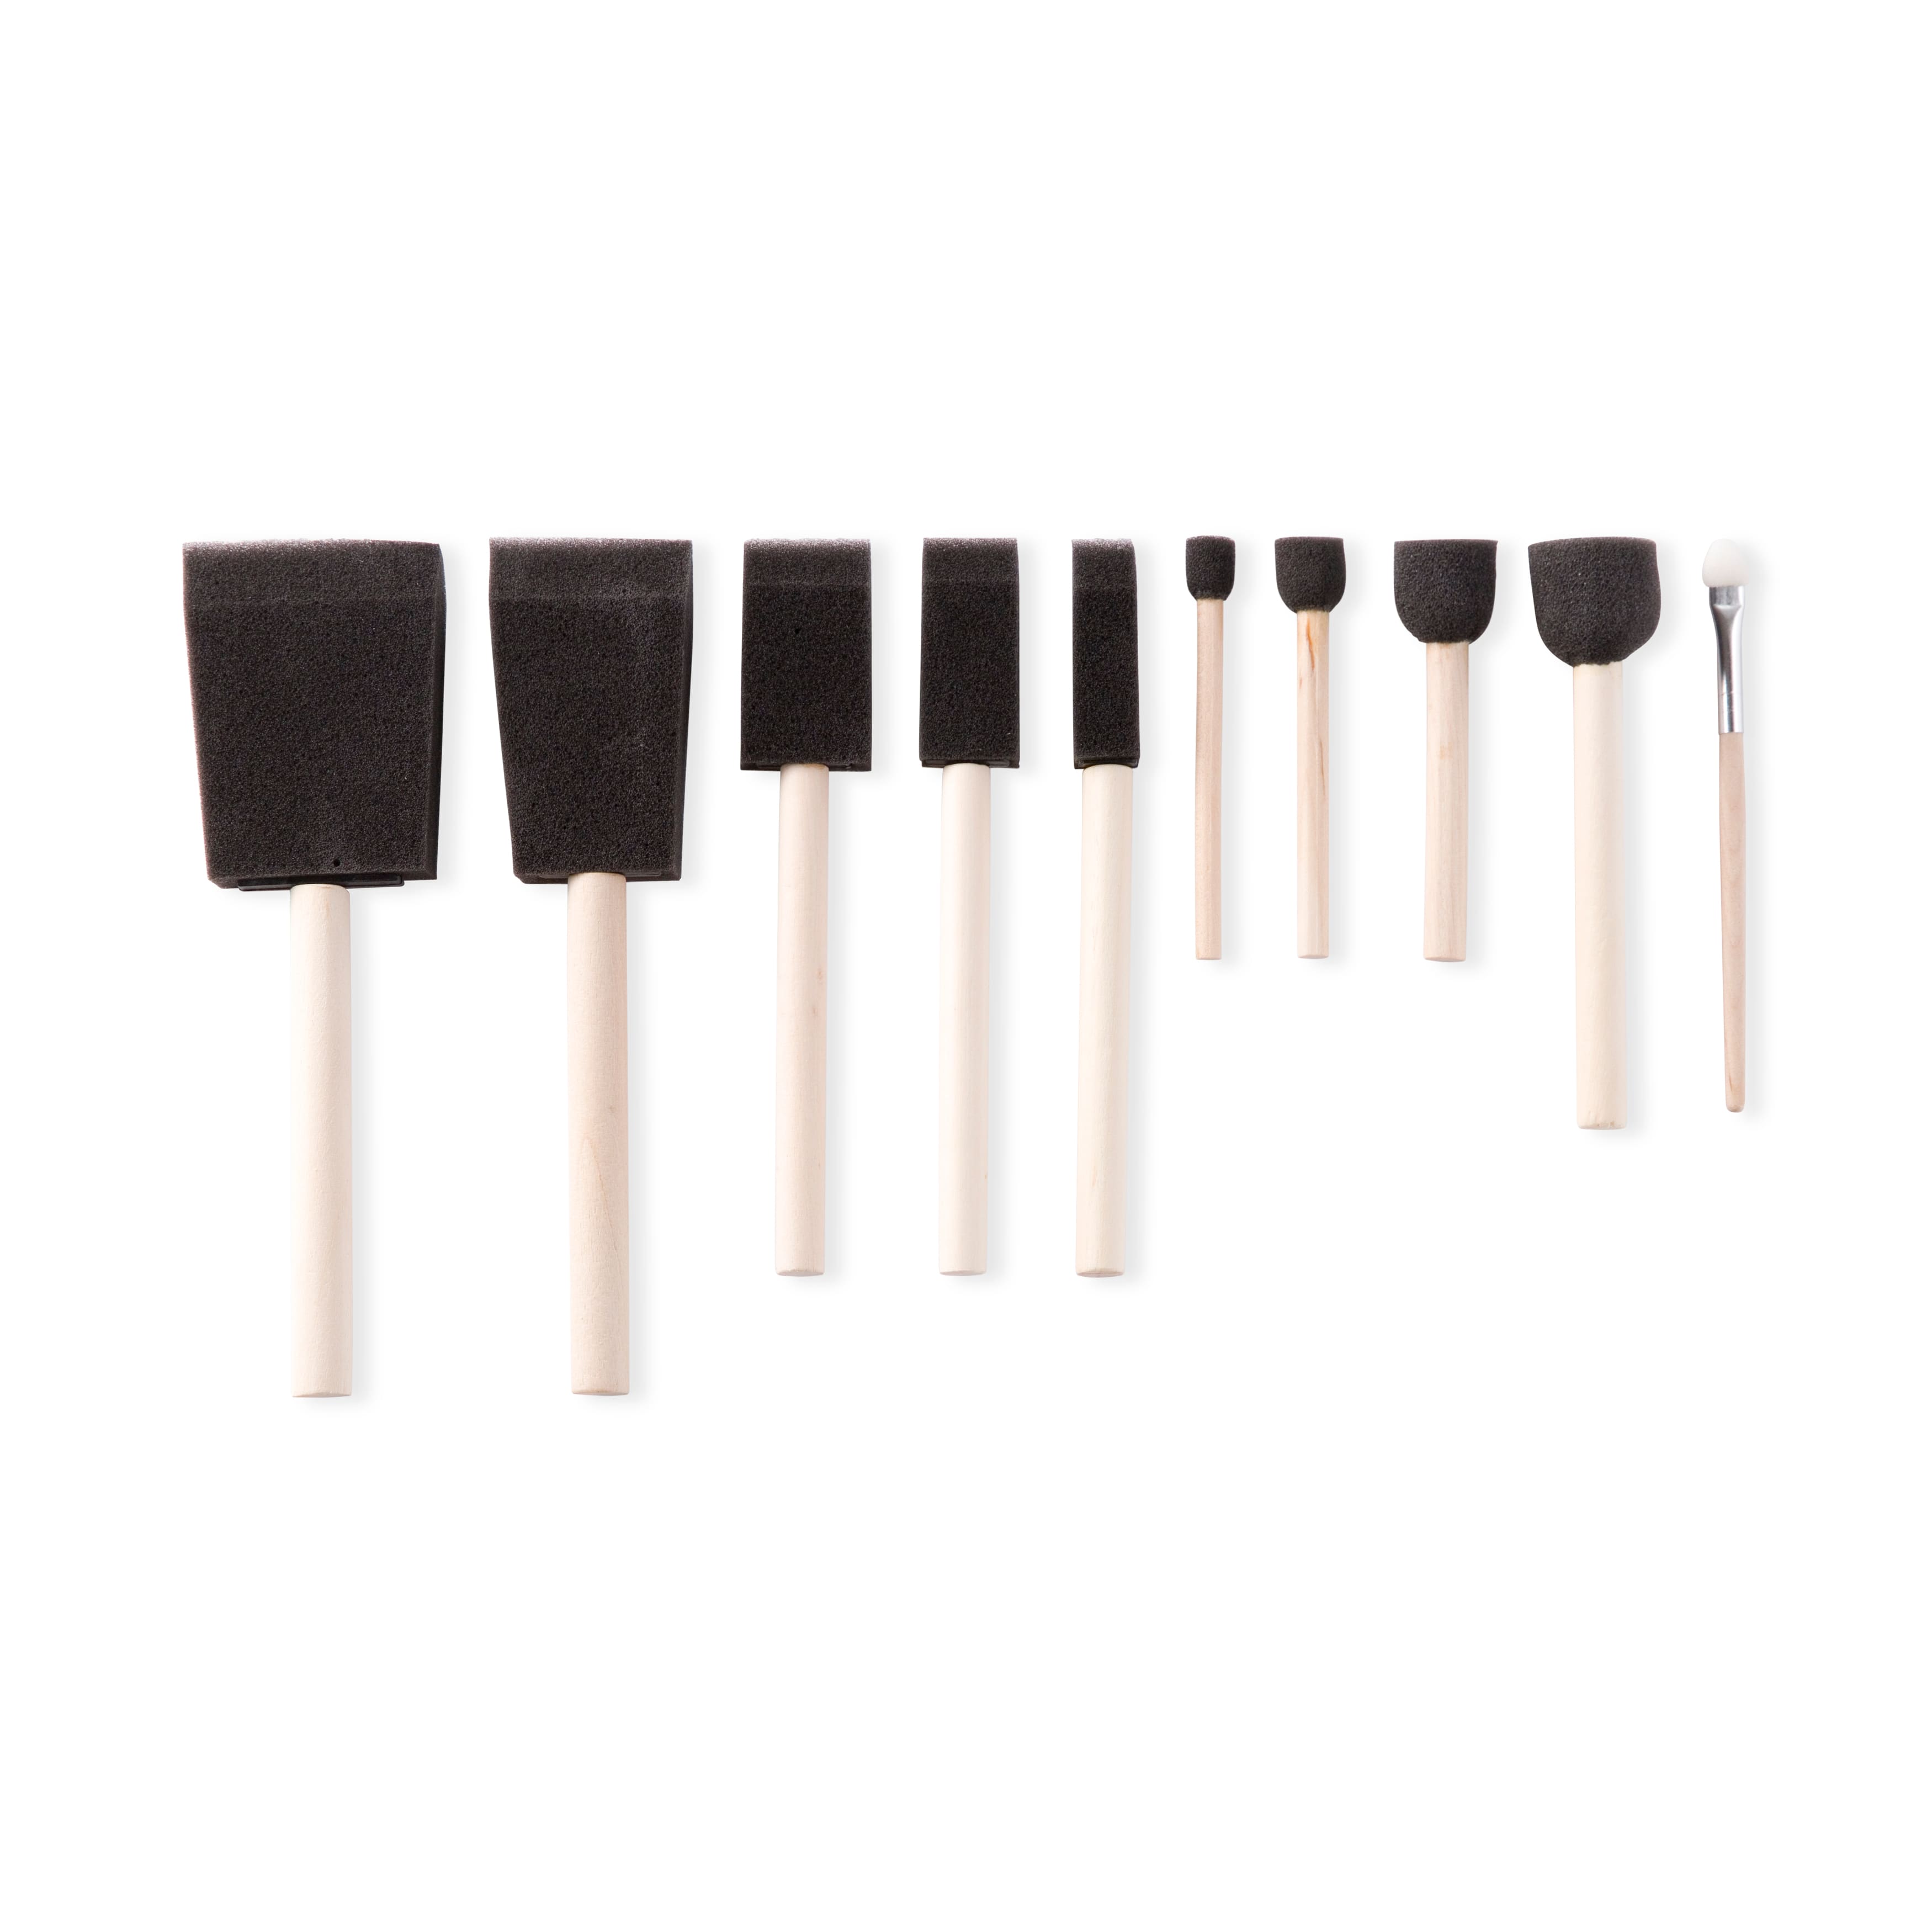 Incraftables Sponge Brushes for Painting 24pcs. Foam Brushes for Staining, Arts, Paints & Mod Podge